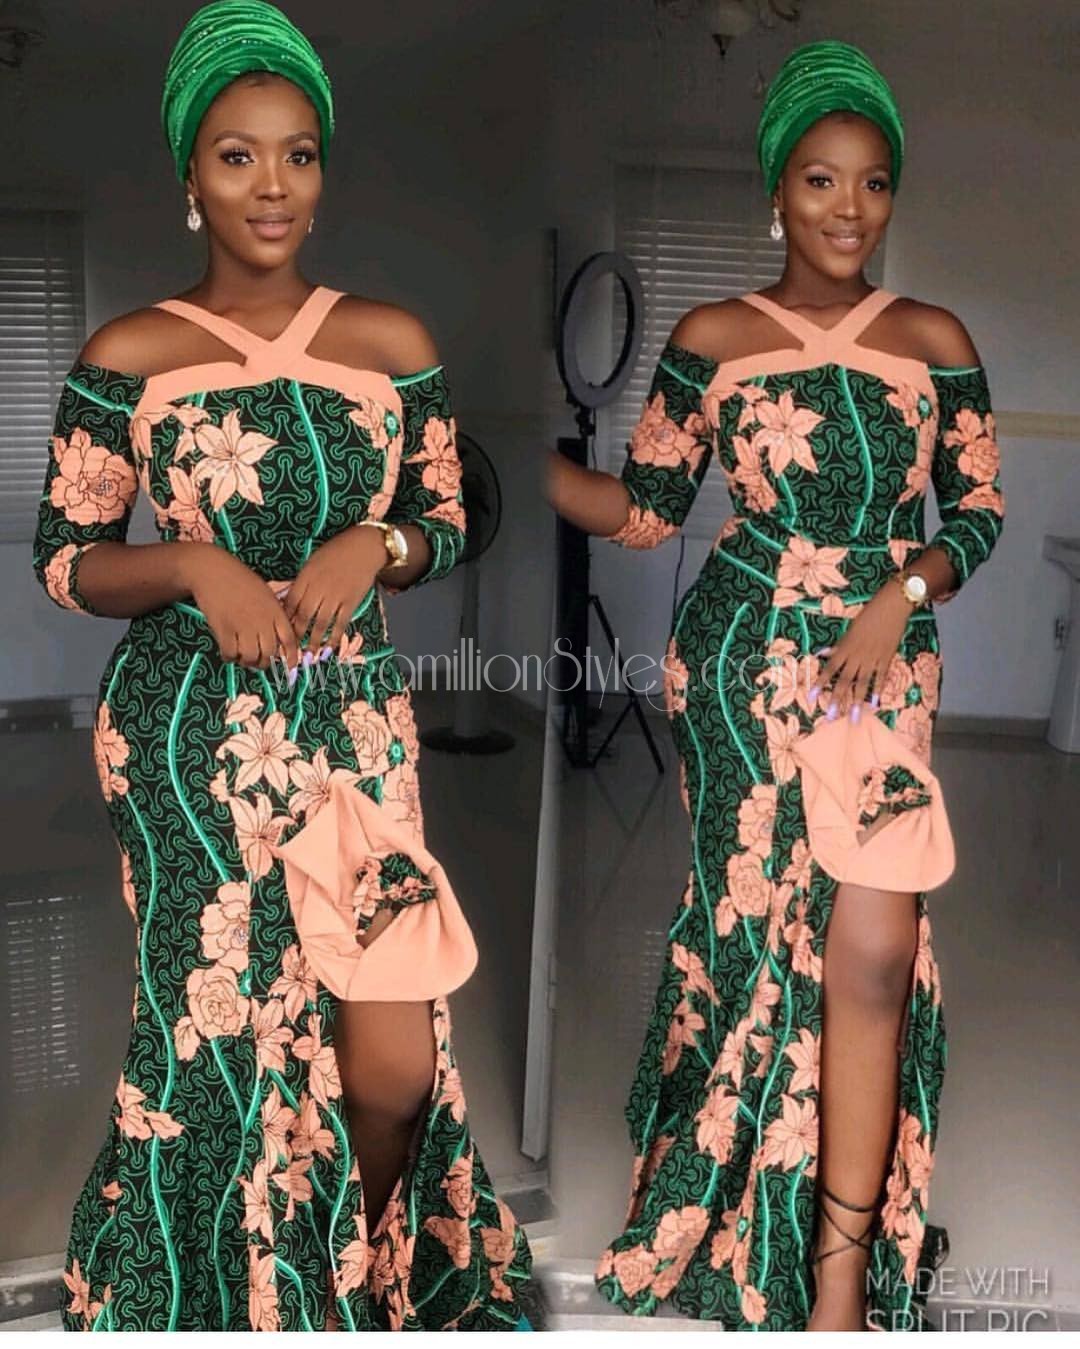 Show Off Your Style Wearing These Fabulously Unique Asoebi Styles